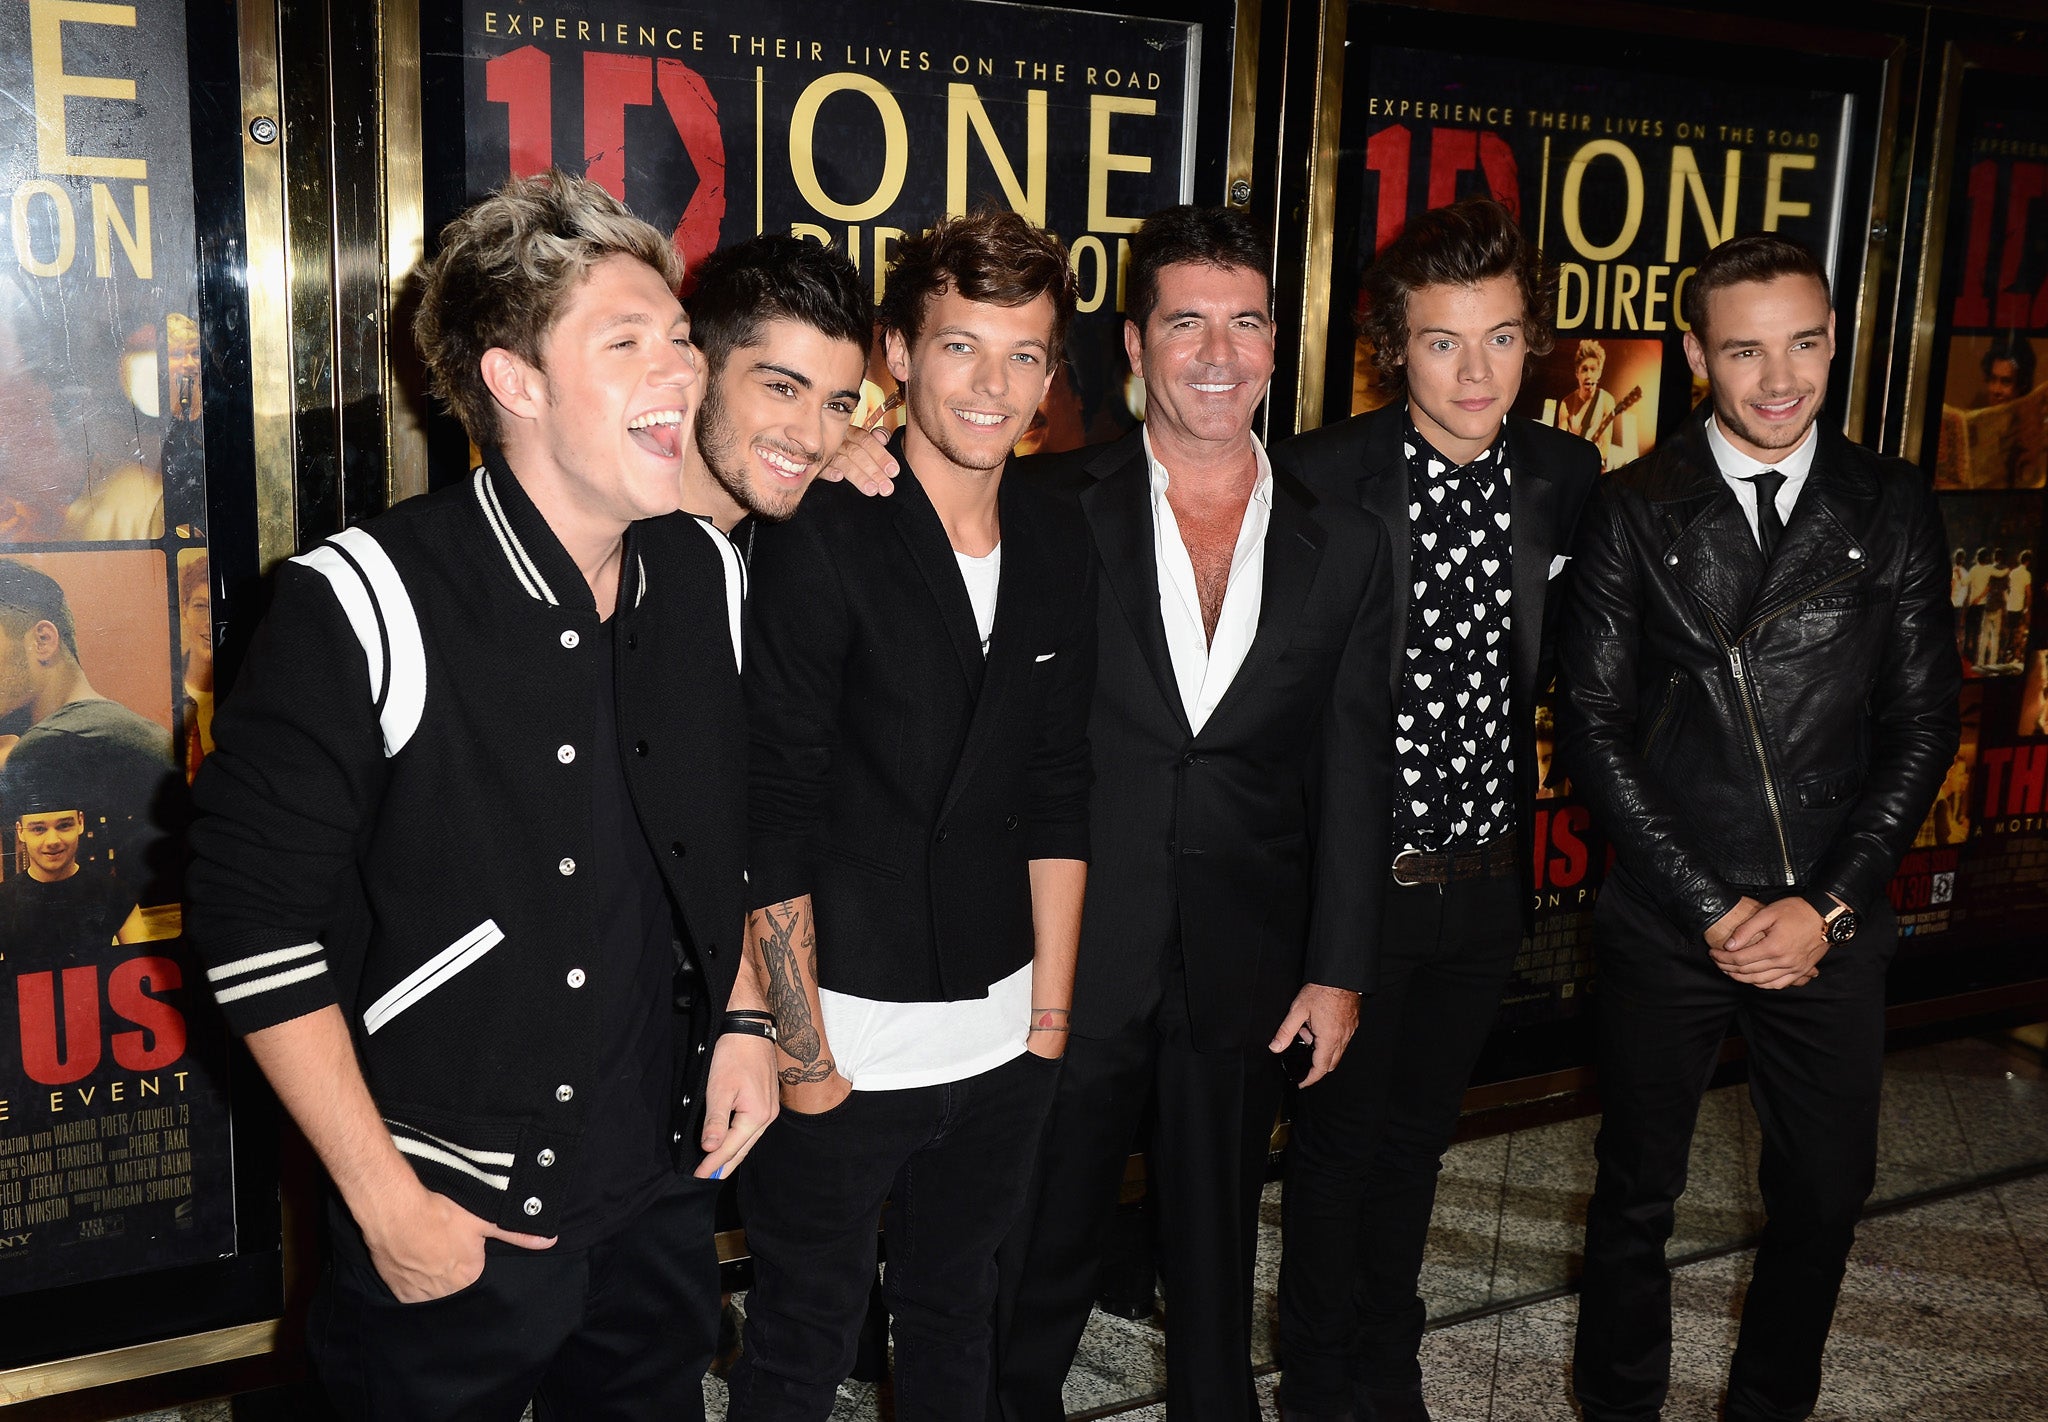 Simon Cowell (C) with Niall Horan, Zayn Malik, Louis Tomlinson, Harry Styles and Liam Payne from One Direction attend the 'One Direction This Is Us' world premiere